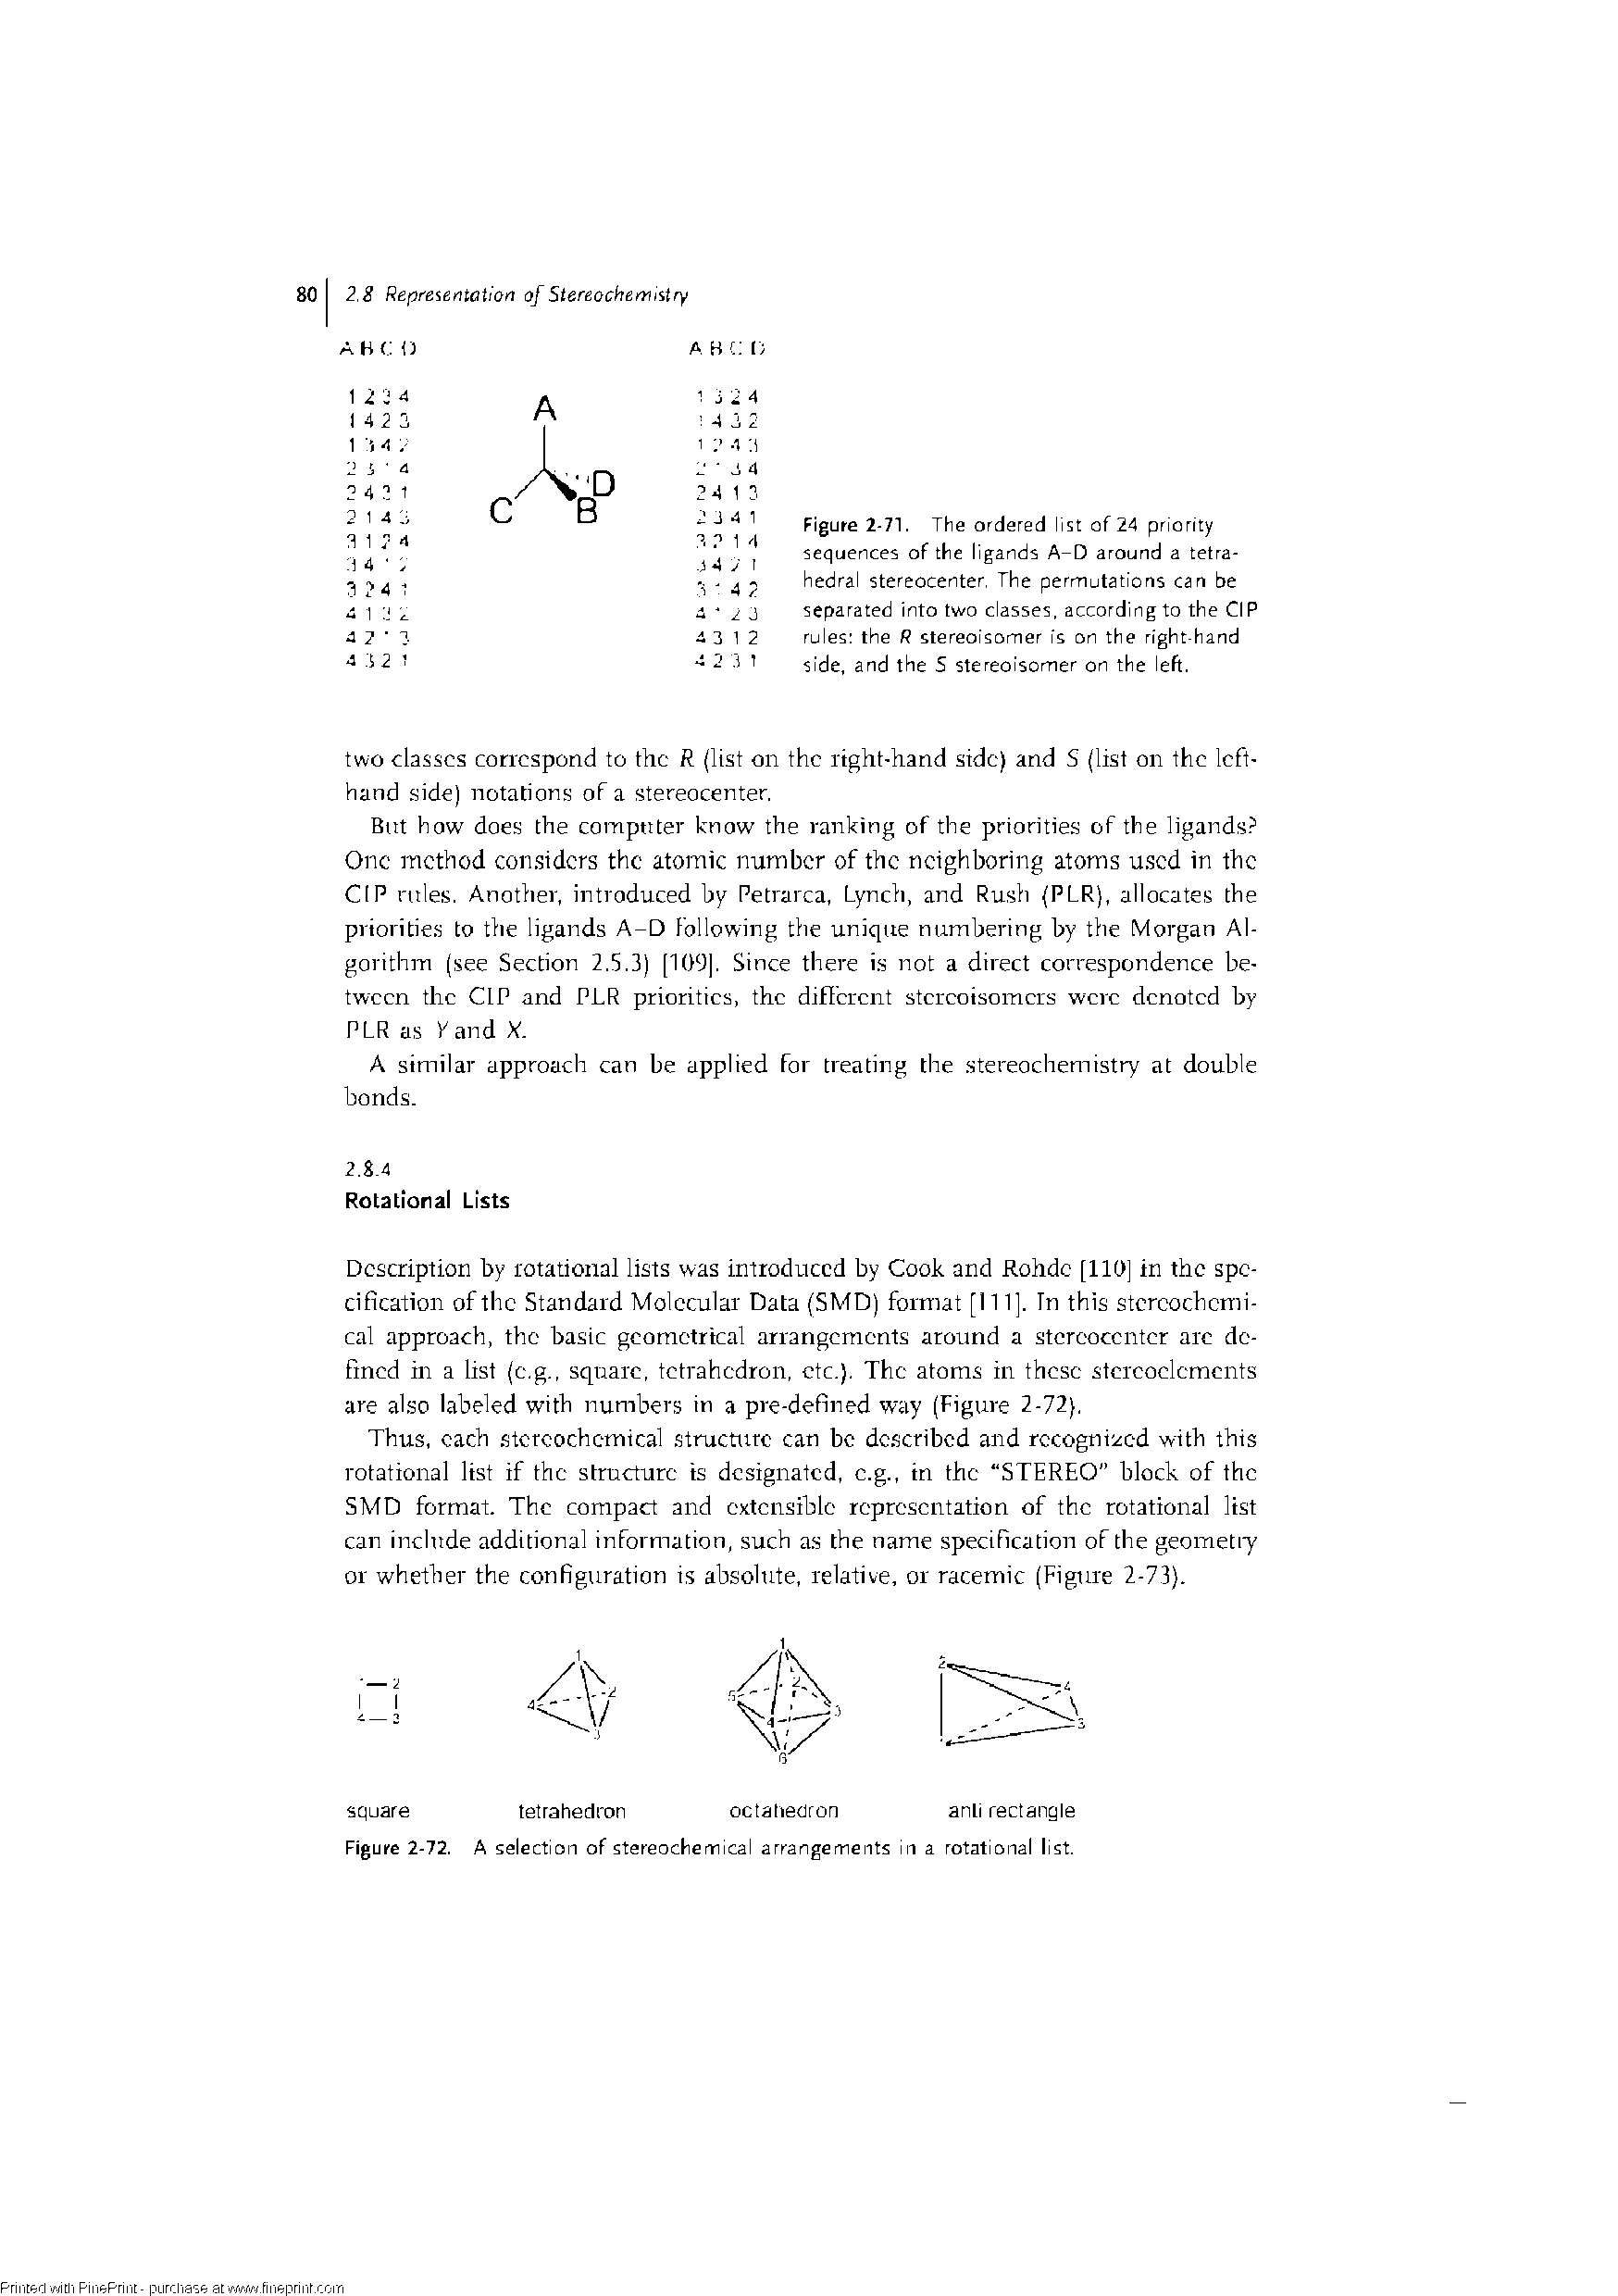 Figure 2-72. A selection of stereochemical arrangements in a rotational list.